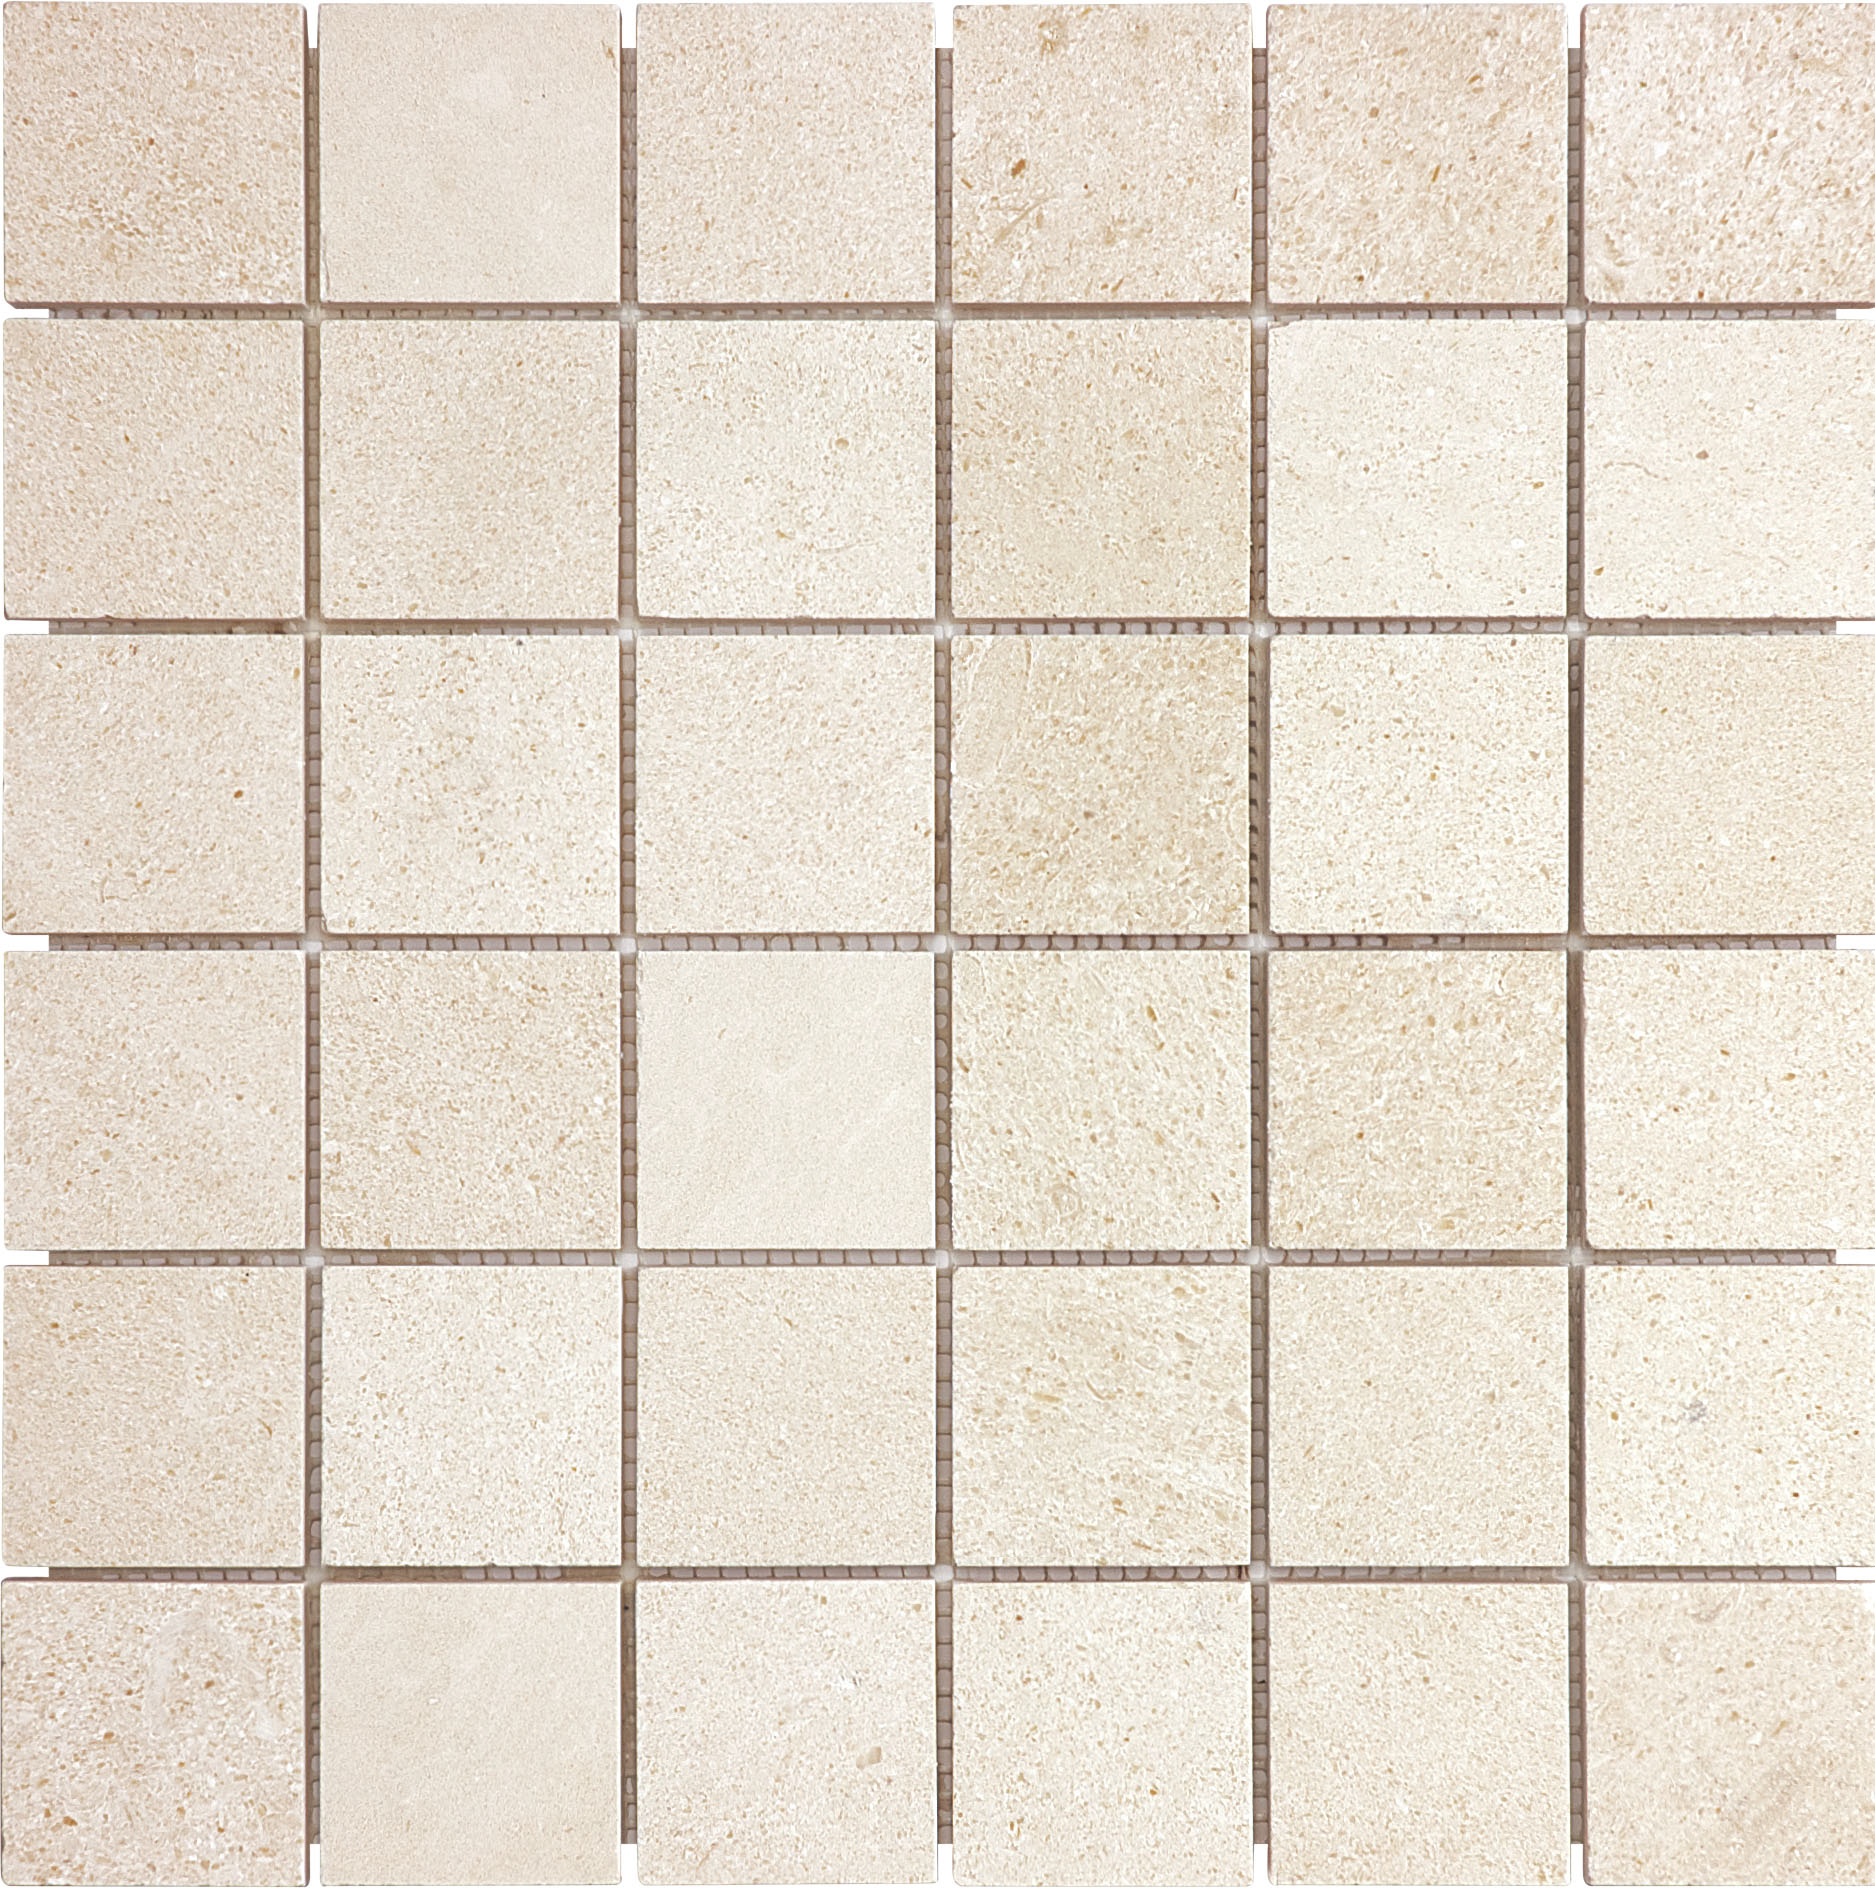 limestone straight stack 2x2-inch pattern natural stone mosaic from serene ivory anatolia collection distributed by surface group international honed finish straight edge edge mesh shape